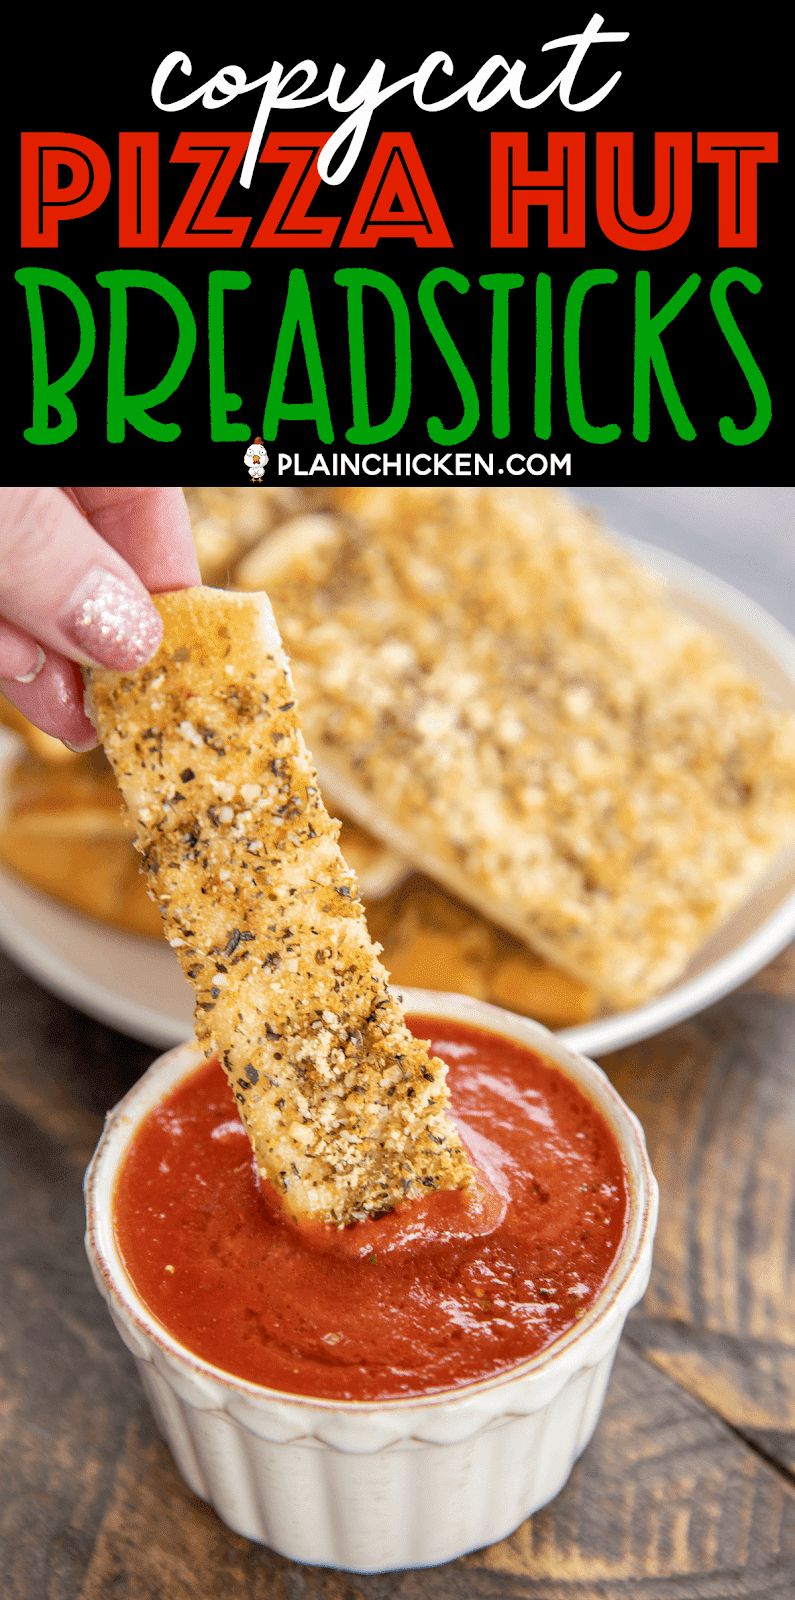 Copycat Pizza Hut Breadsticks - so easy to make and seriously delicious!!! Refrigerated pizza dough topped with parmesan cheese, garlic powder, salt, onion powder, oregano and basil. Dip in warm pizza sauce. Tastes just like the original! Ready to eat in under 20 minutes! #breadsticks #pizzahut #copycat